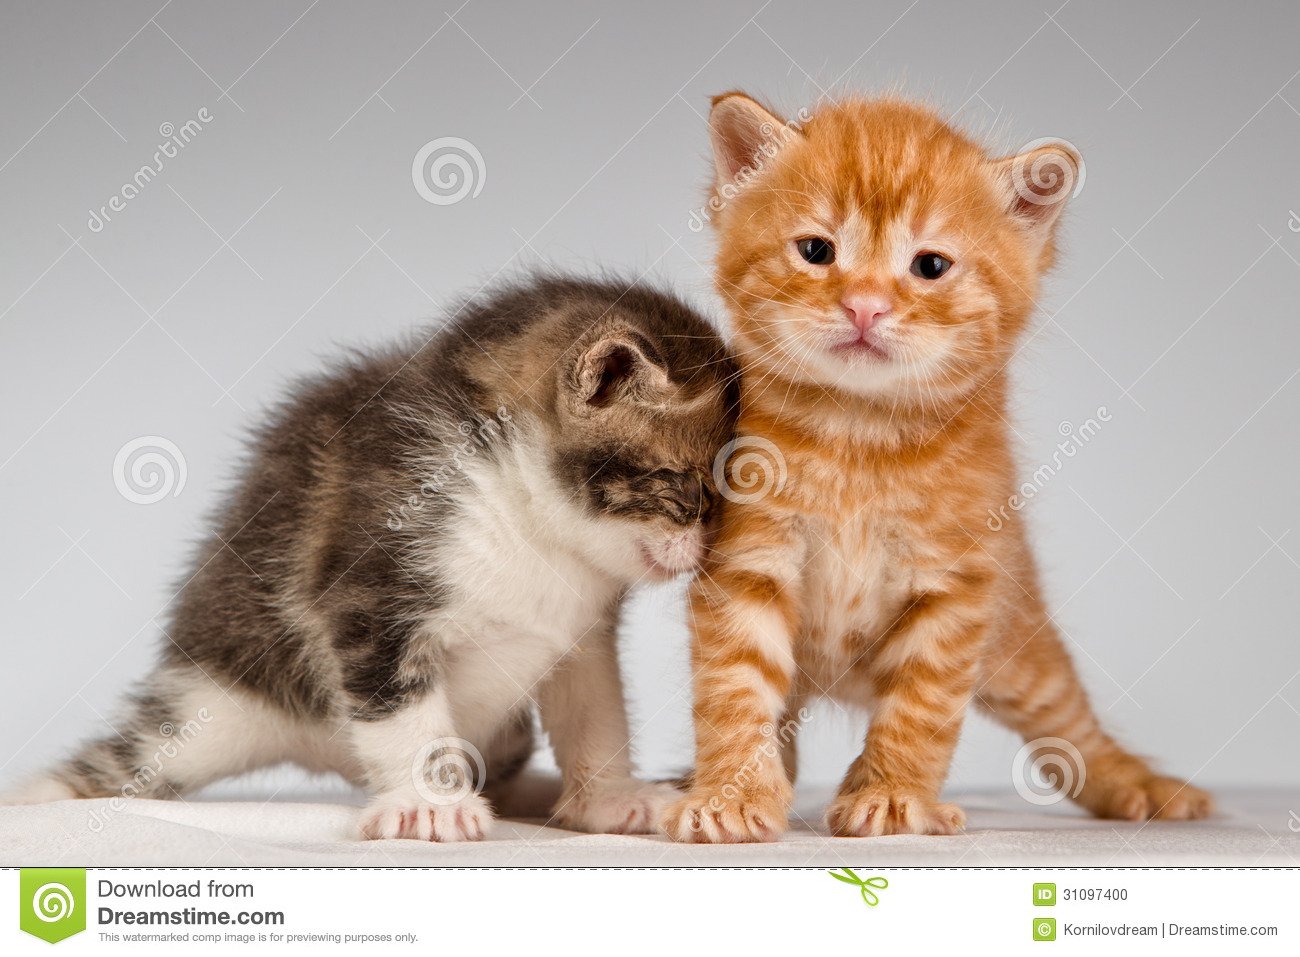 Two Funny Playful Little Red Hair Kittens Playing With Each Other